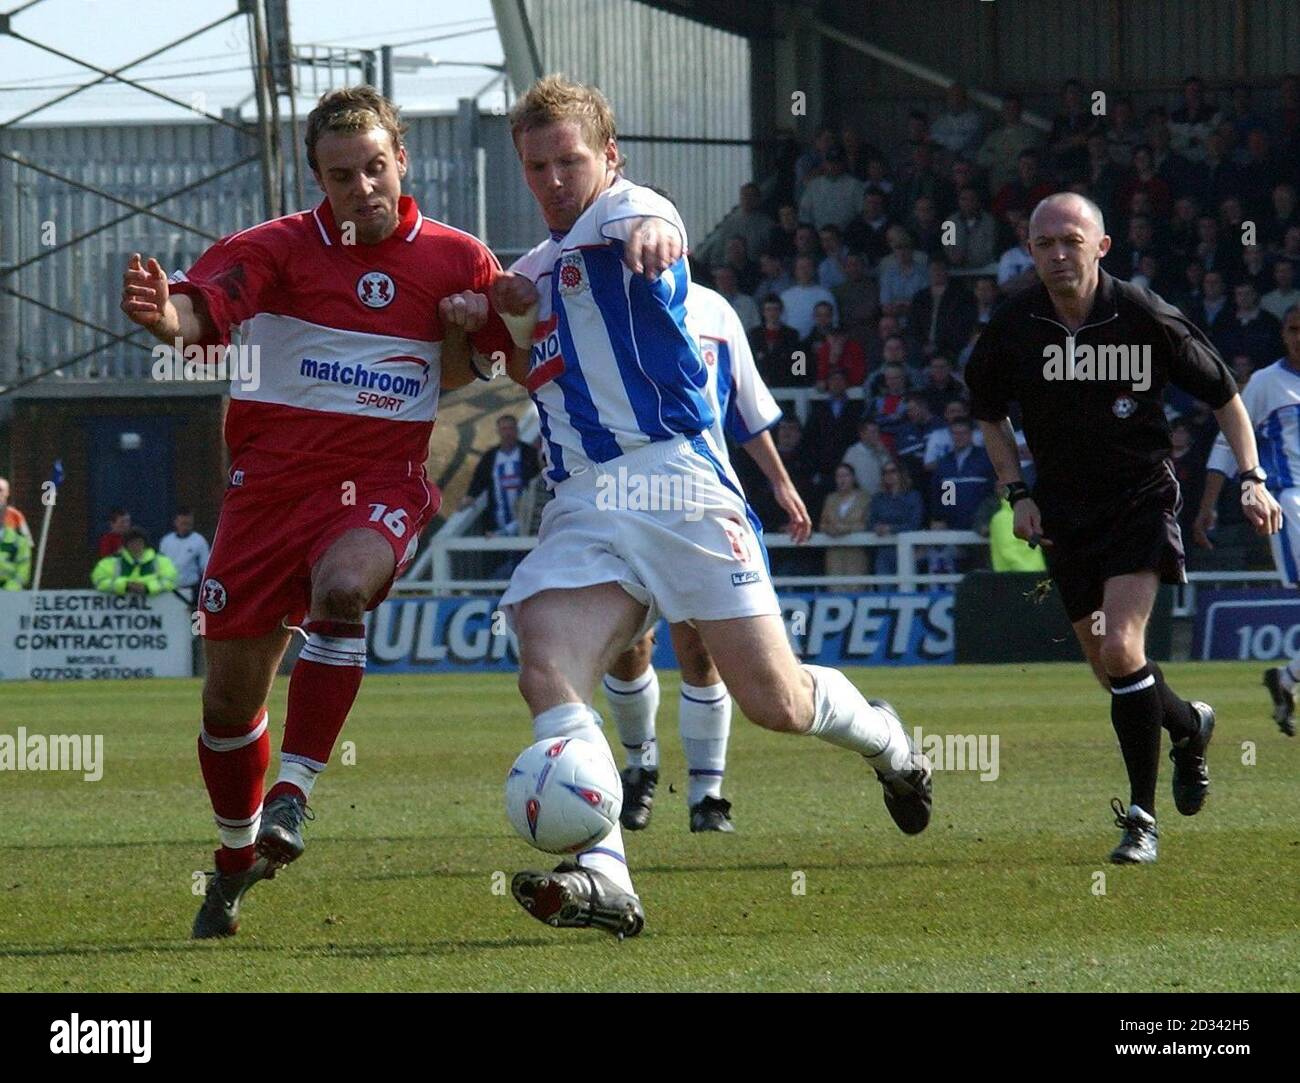 Hartlepool's Richie Humphries (centre) in action against Leyton Orient's Wayne Purser during their Nationwide Division Three match at Hartlepool's Victoria Park ground.   THIS PICTURE CAN ONLY BE USED WITHIN THE CONTEXT OF AN EDITORIAL FEATURE. NO UNOFFICIAL CLUB WEBSITE USE. Stock Photo